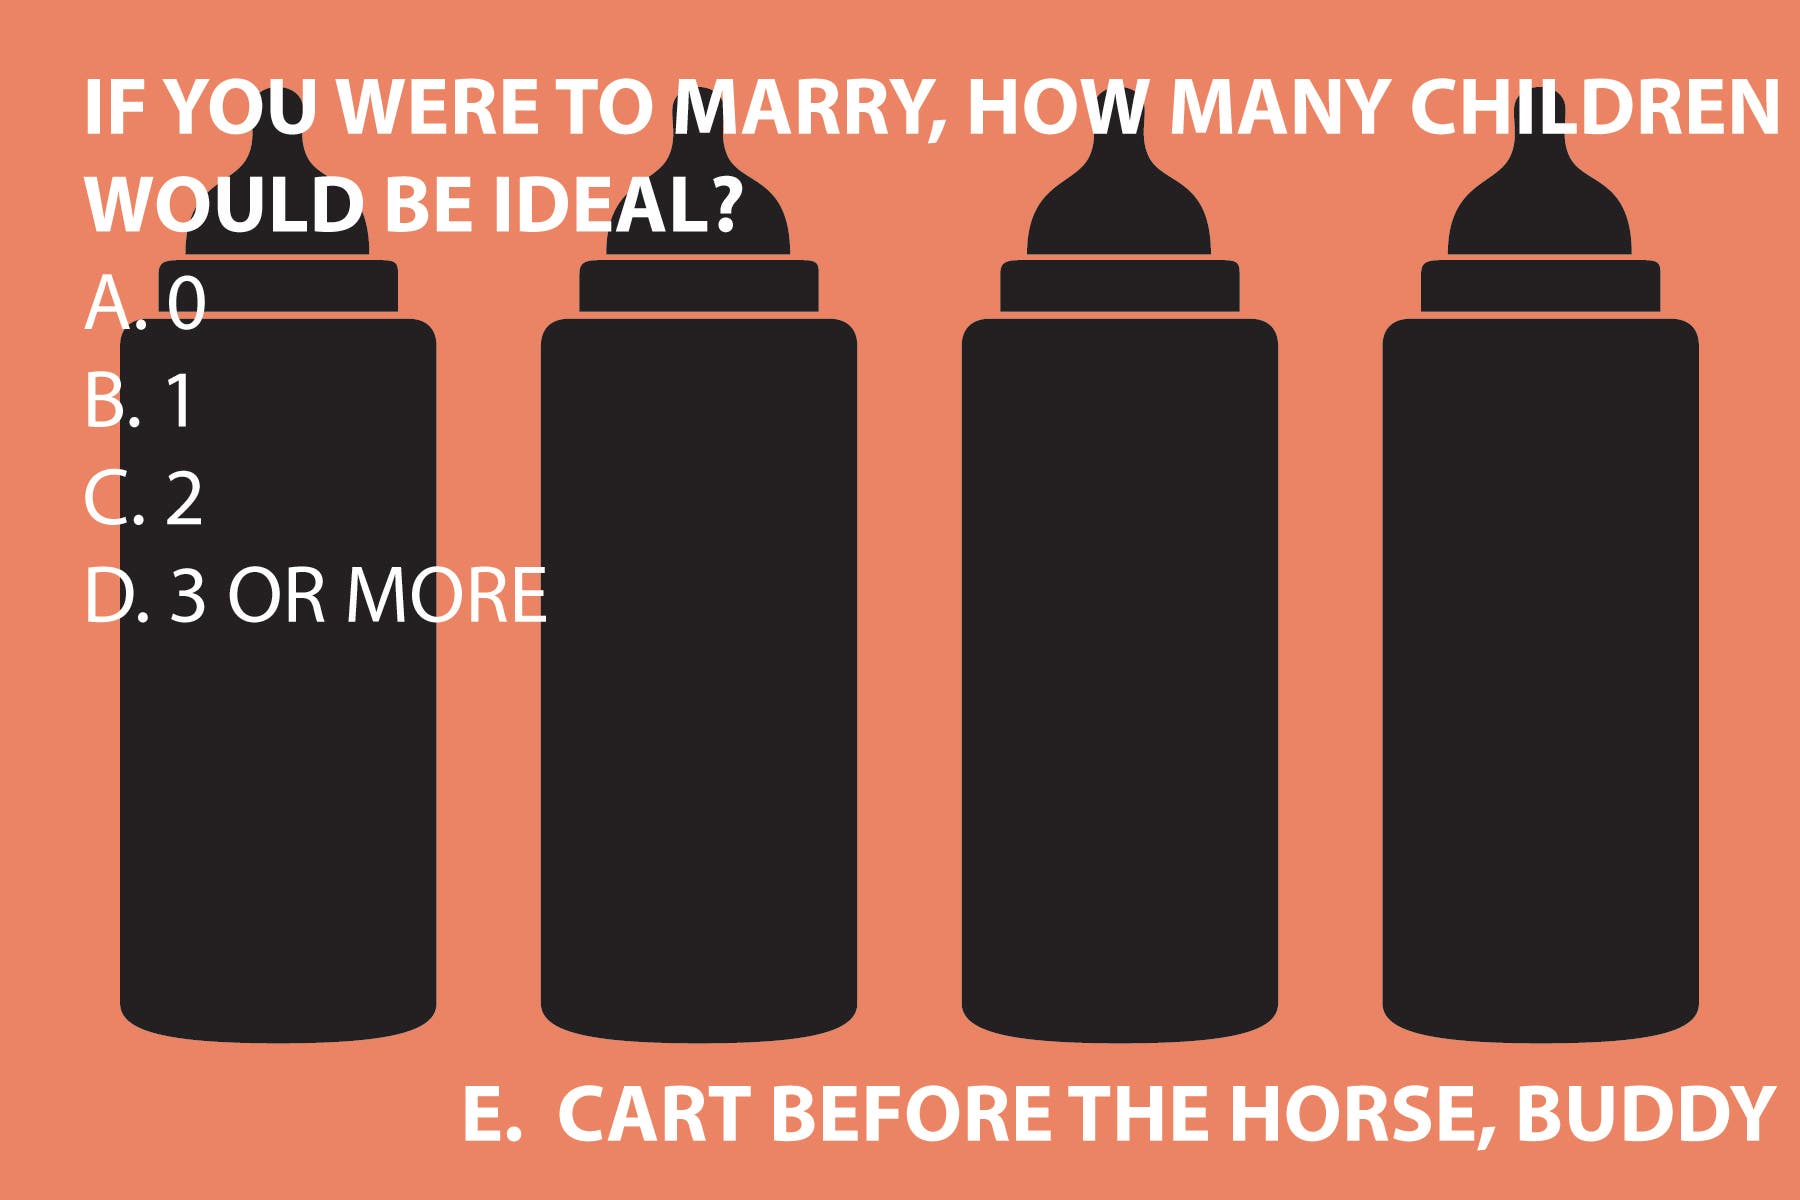  IF YOU WERE TO MARRY, HOW MANY CHILDREN WOULD BE IDEAL?